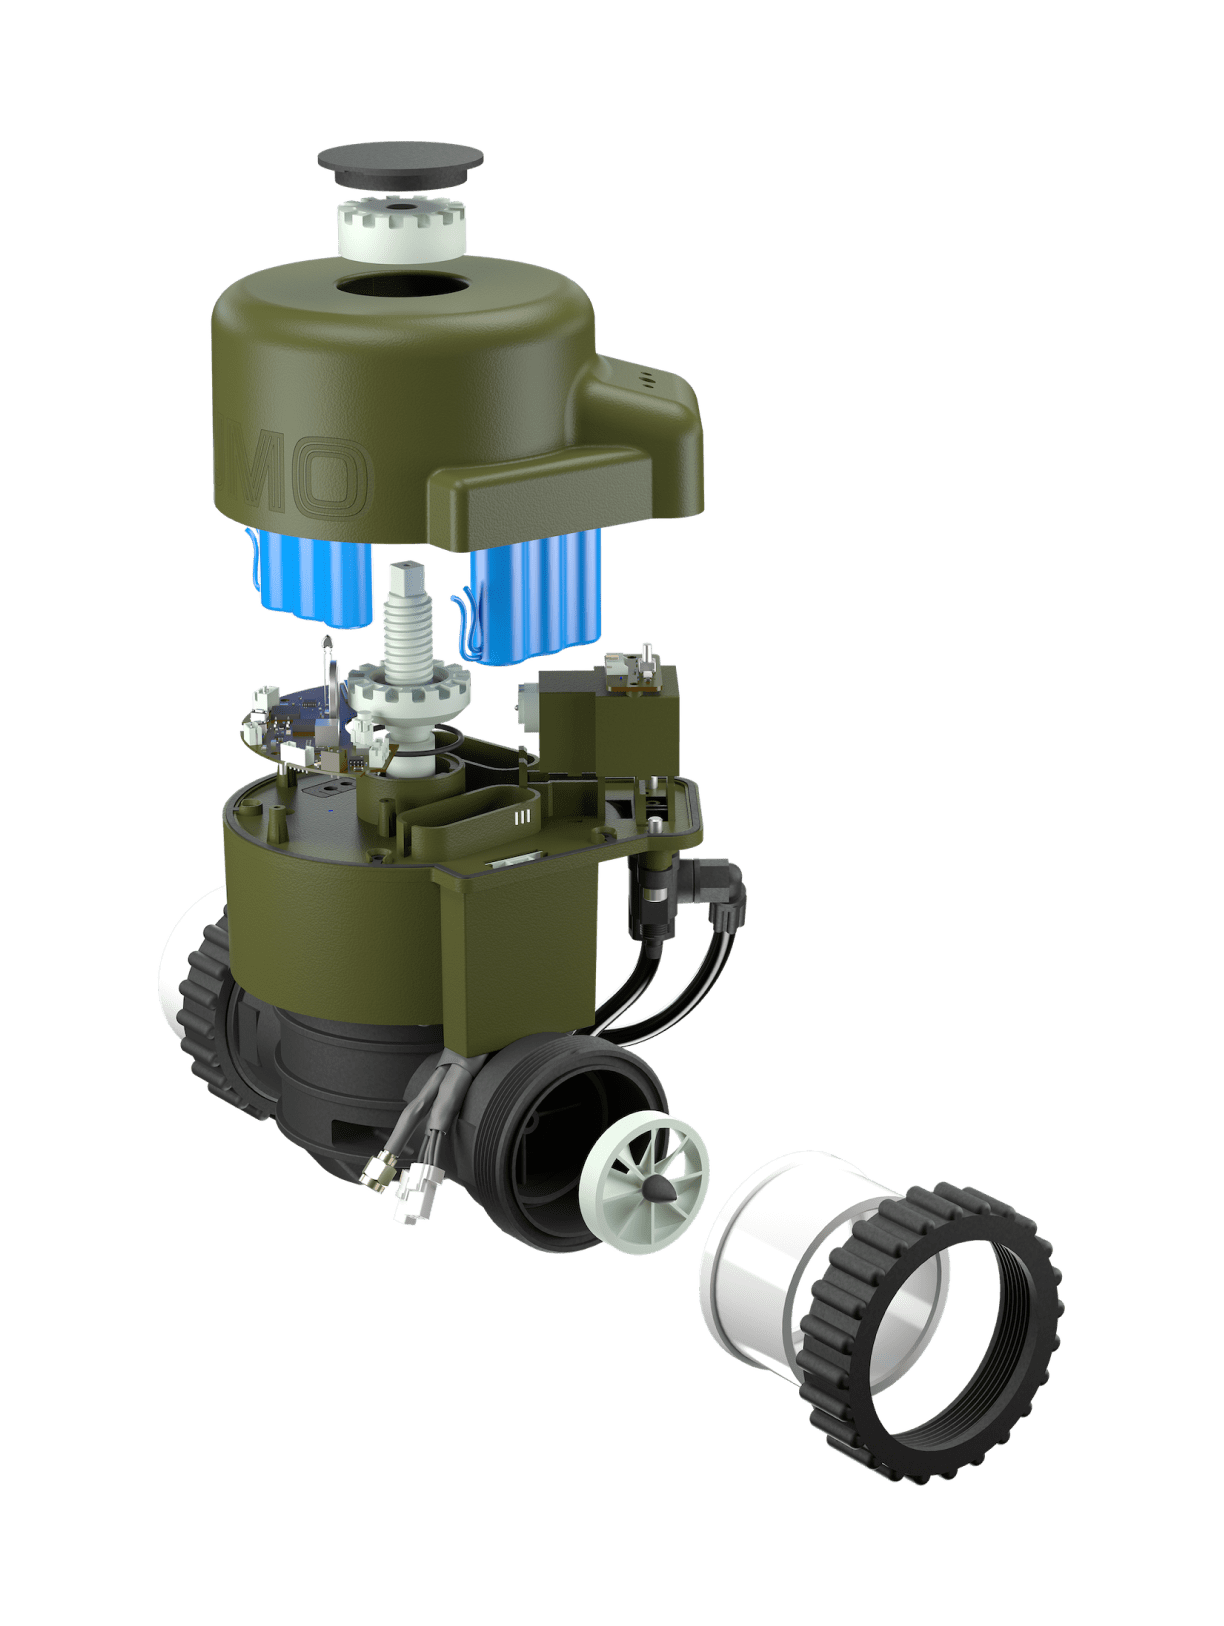 Exploded view of the Lumo One Smart Irrigation Valve